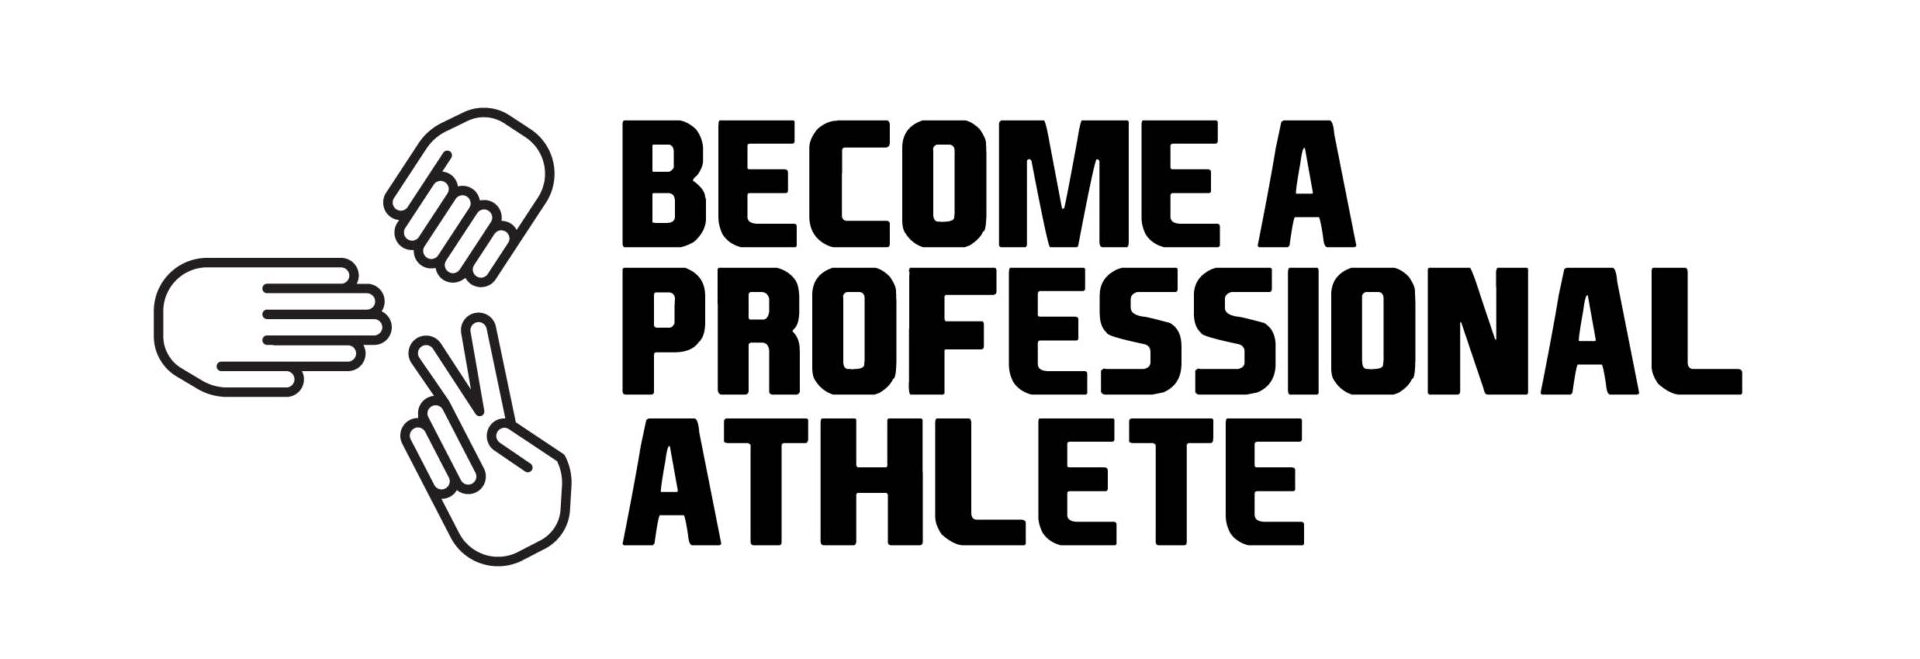 Become a Professional Athlete